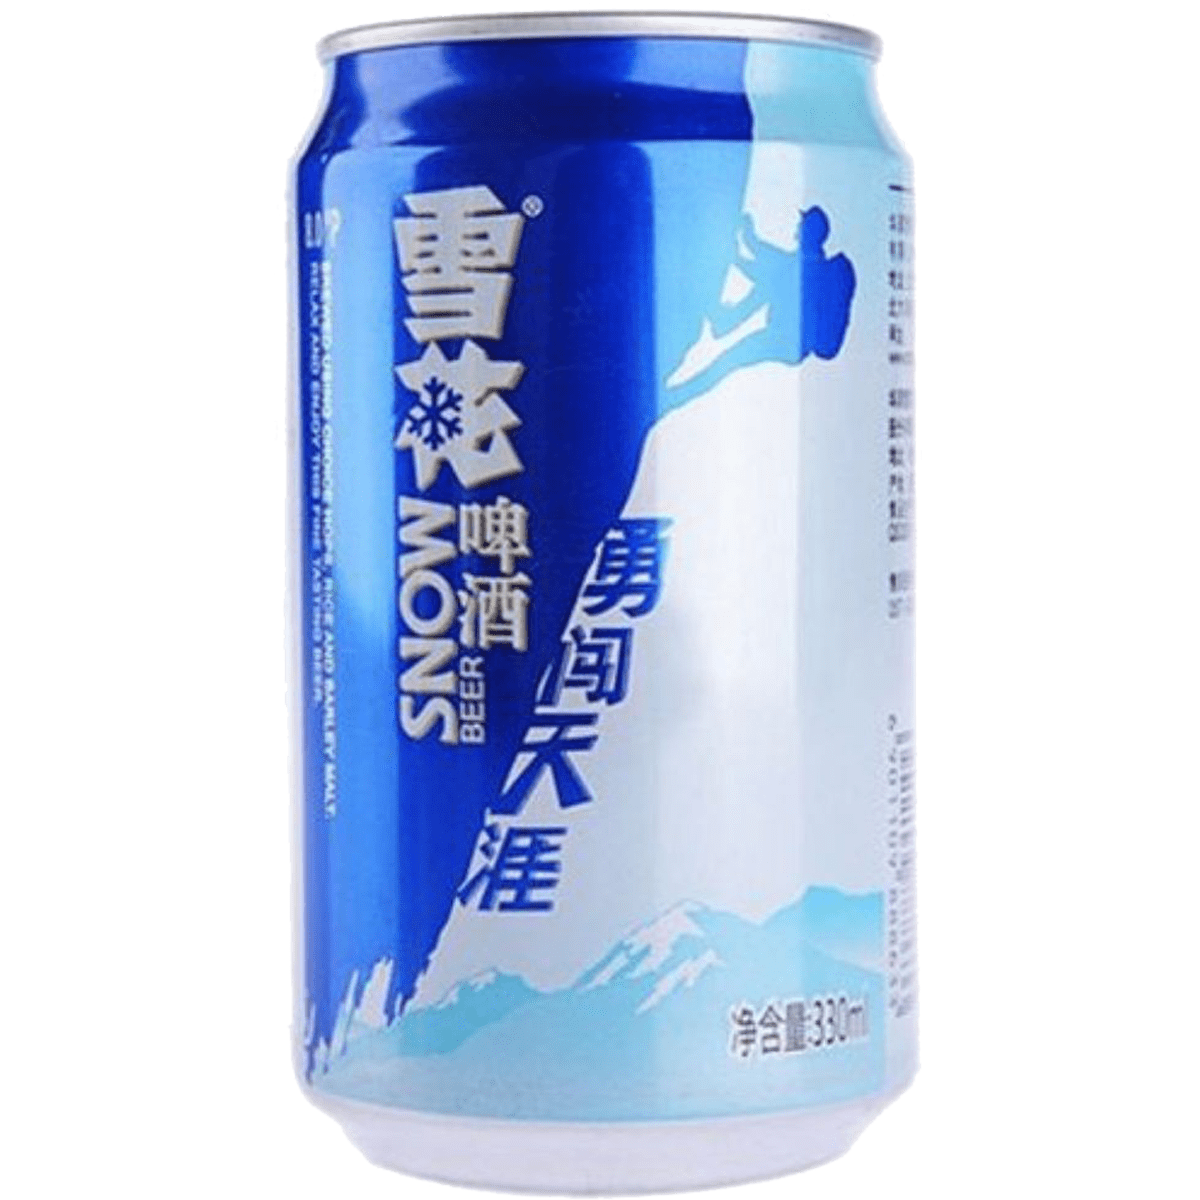 Snow Beer 330mL, Alcohol 3.0%